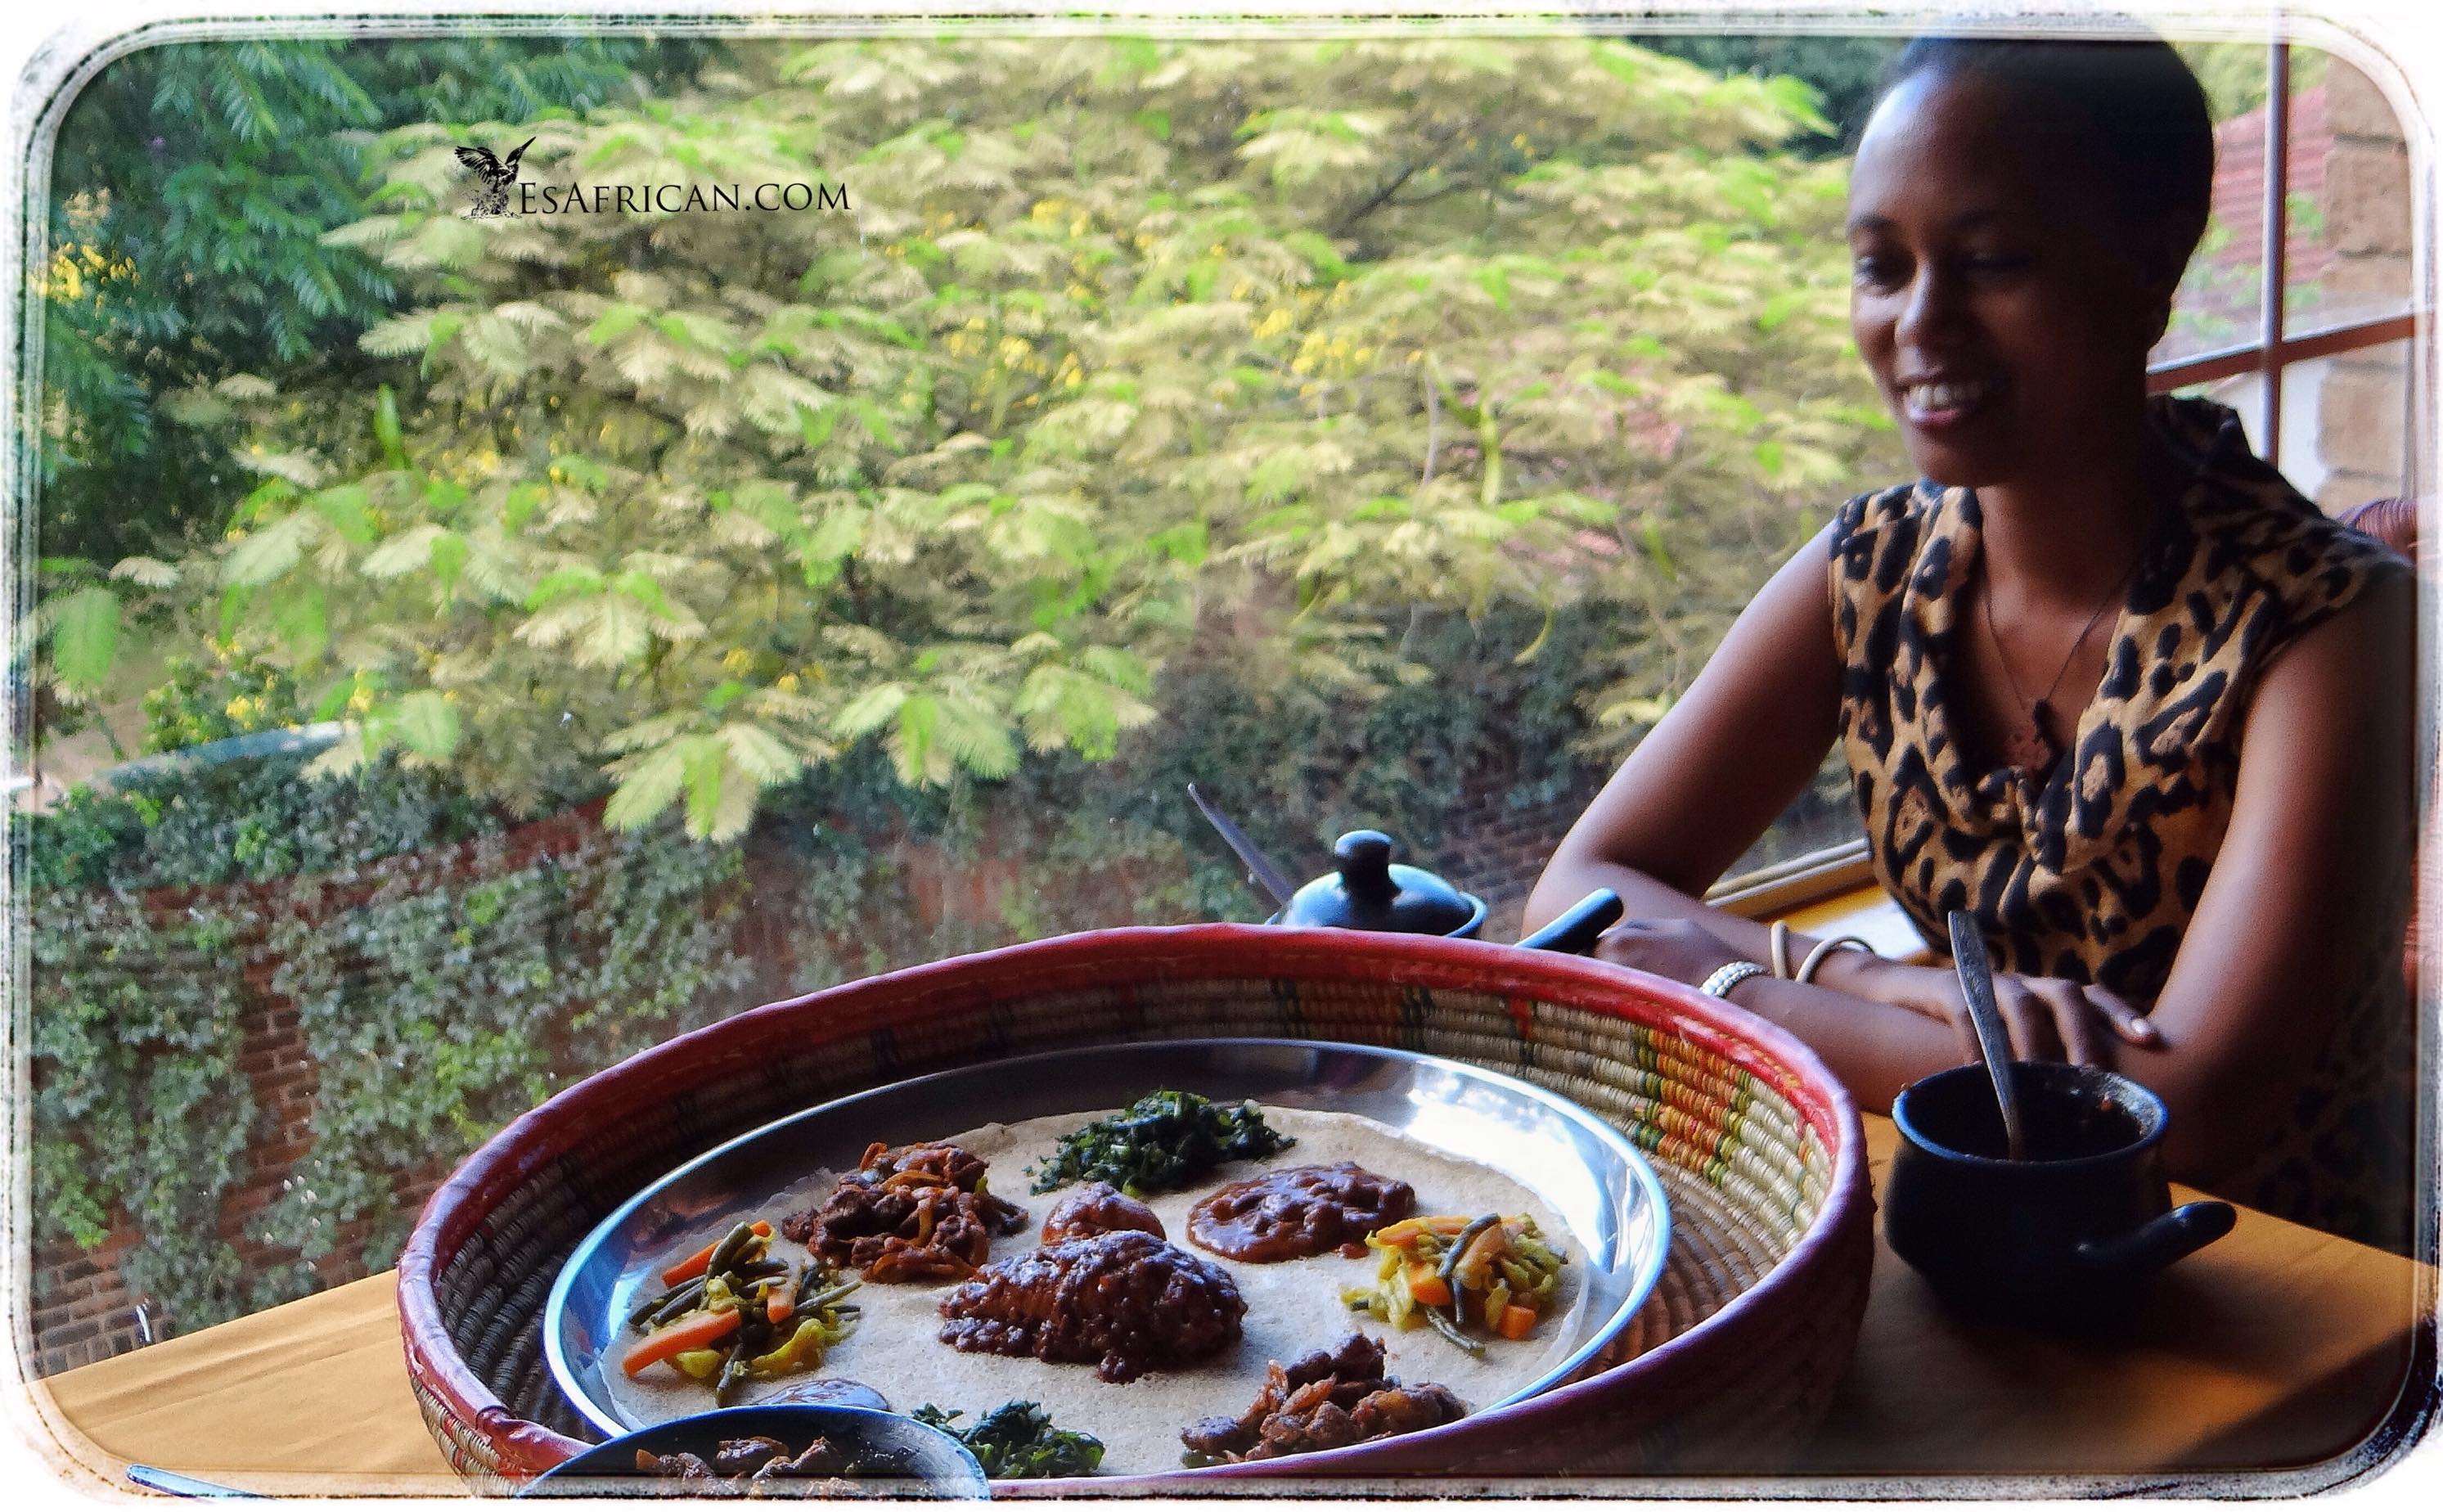 According to Ethiopian traditions the door is always open for you to join with others in eating